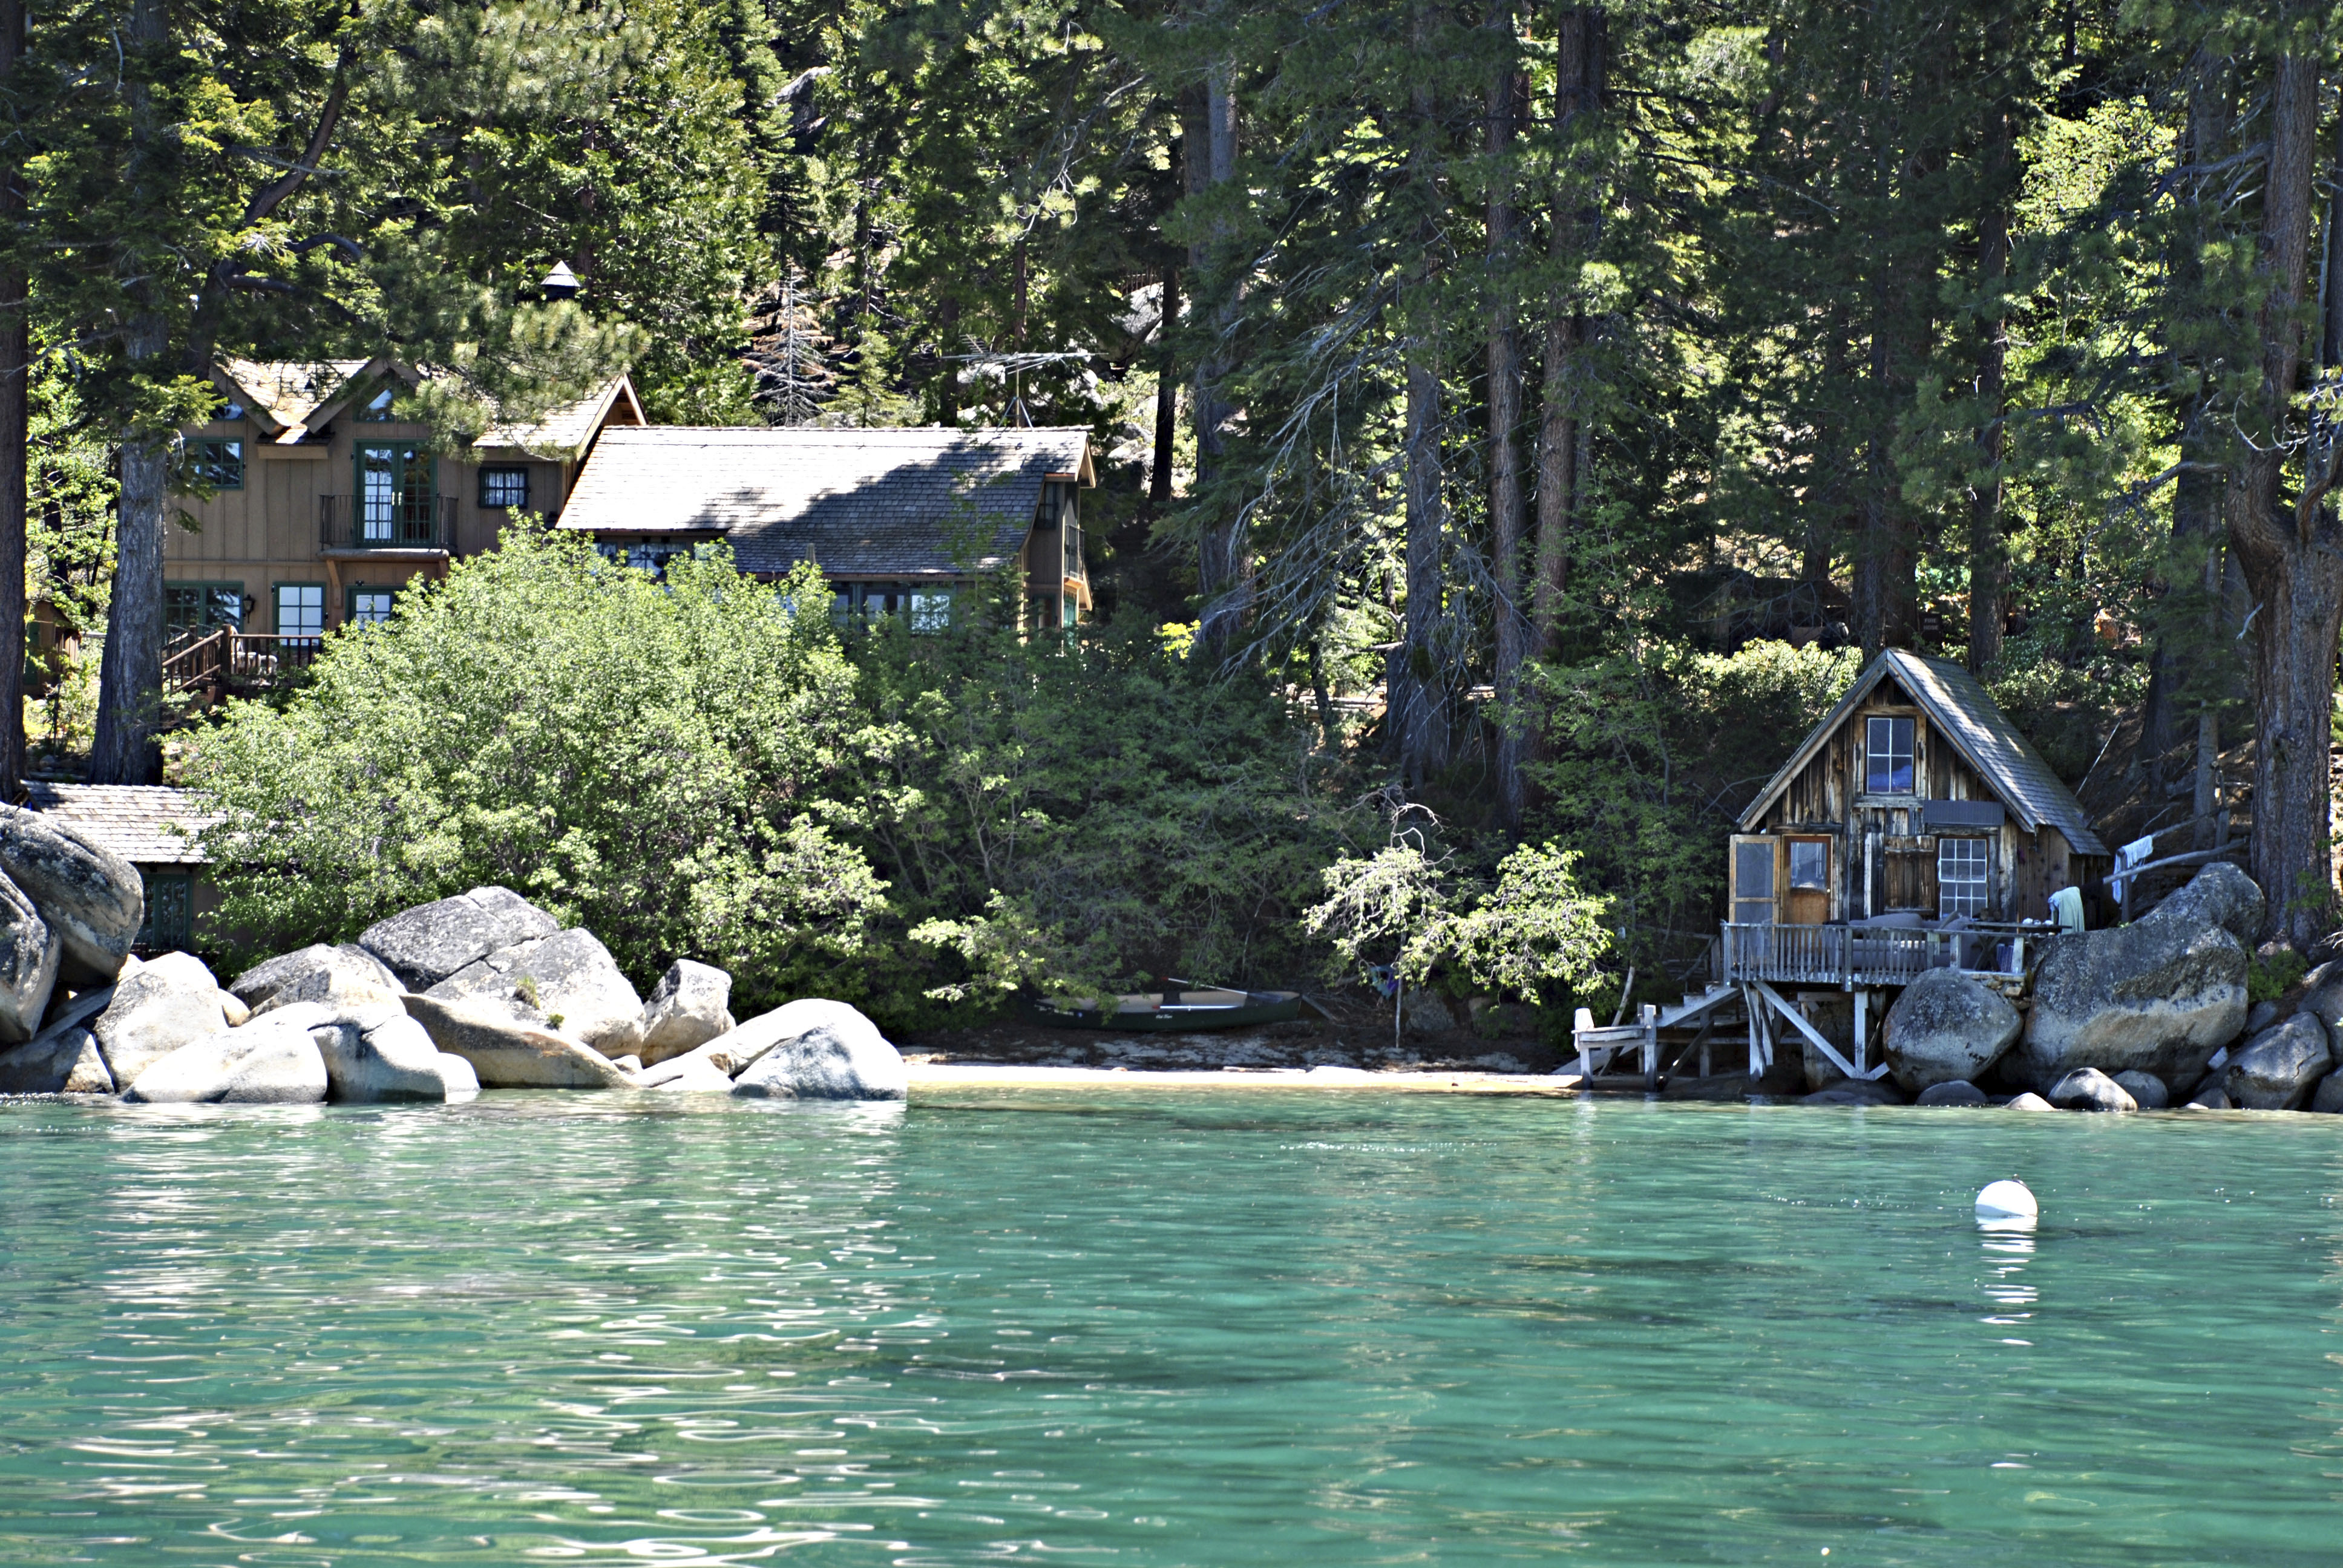 1-800-666-4718 Luxury Lake Tahoe Lake Front Homes For Sale Alvin Steinberg Coldwell Banker Select